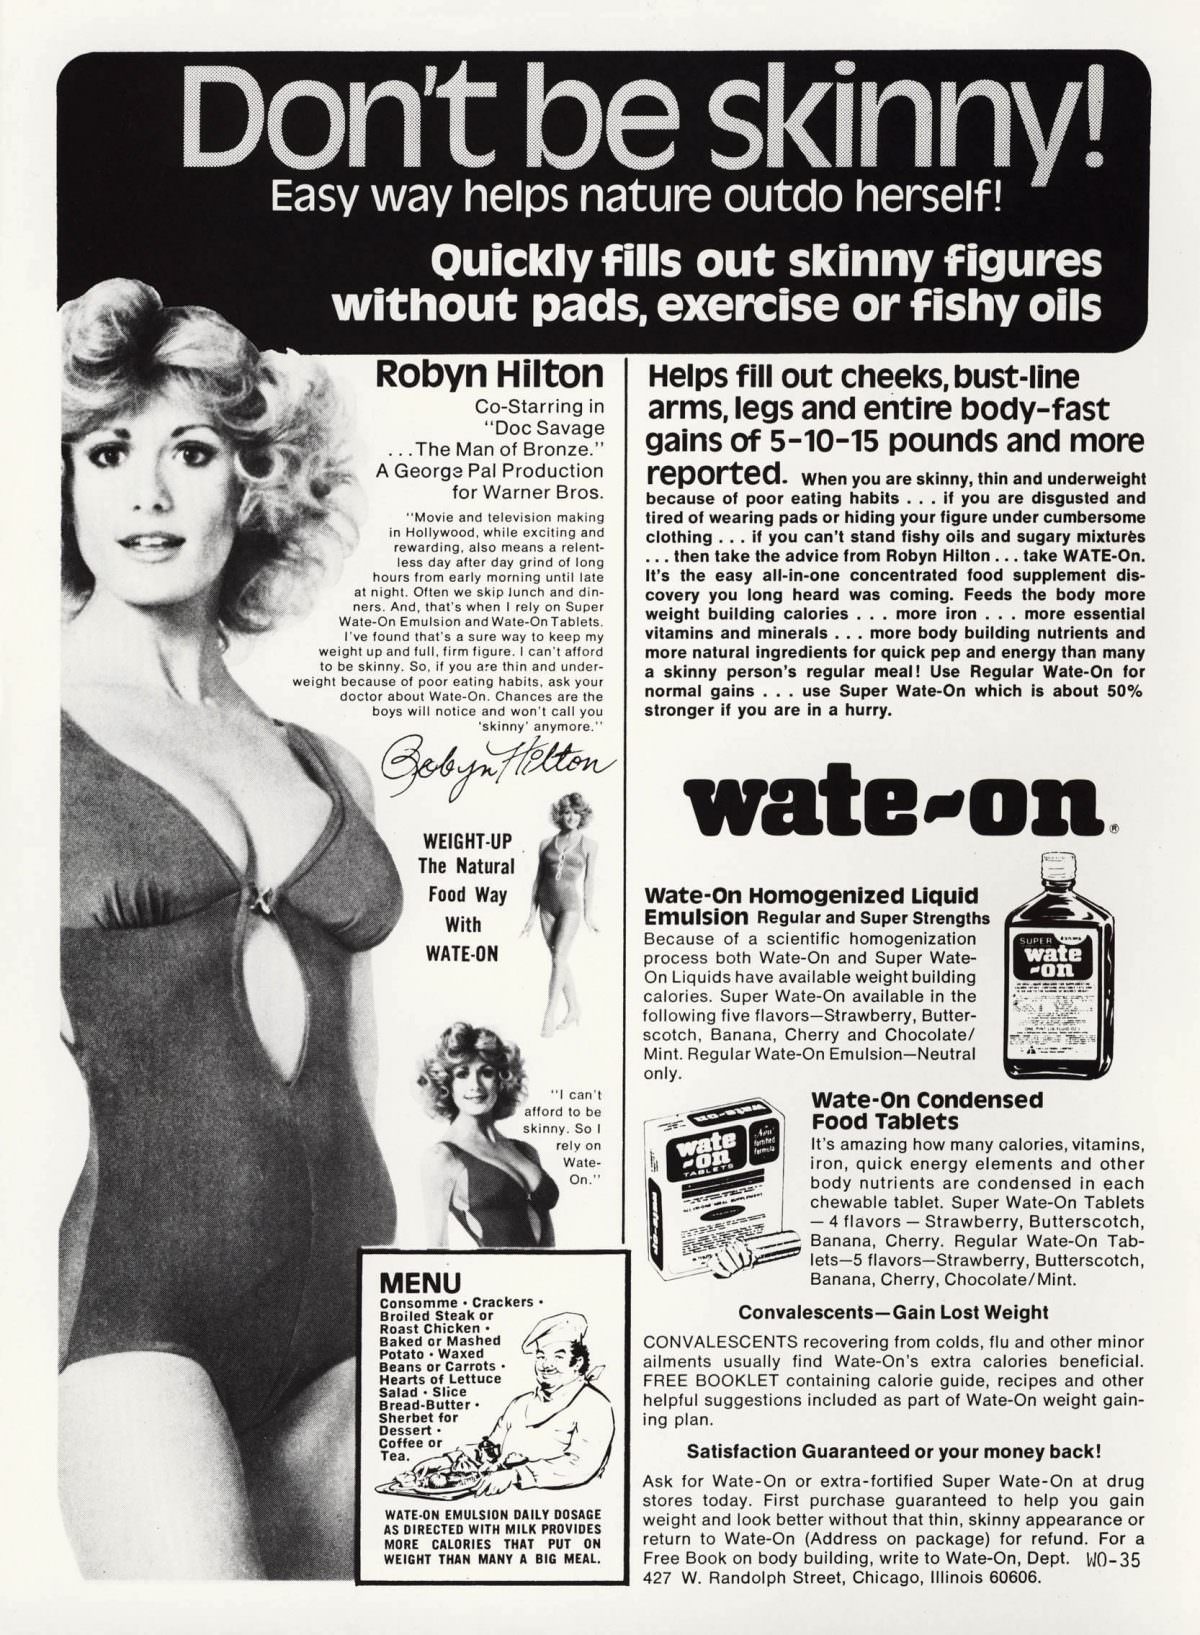 50+ Hilarious Vintage Ads Promoting Weight Gain For Women For Ridiculous Reasons